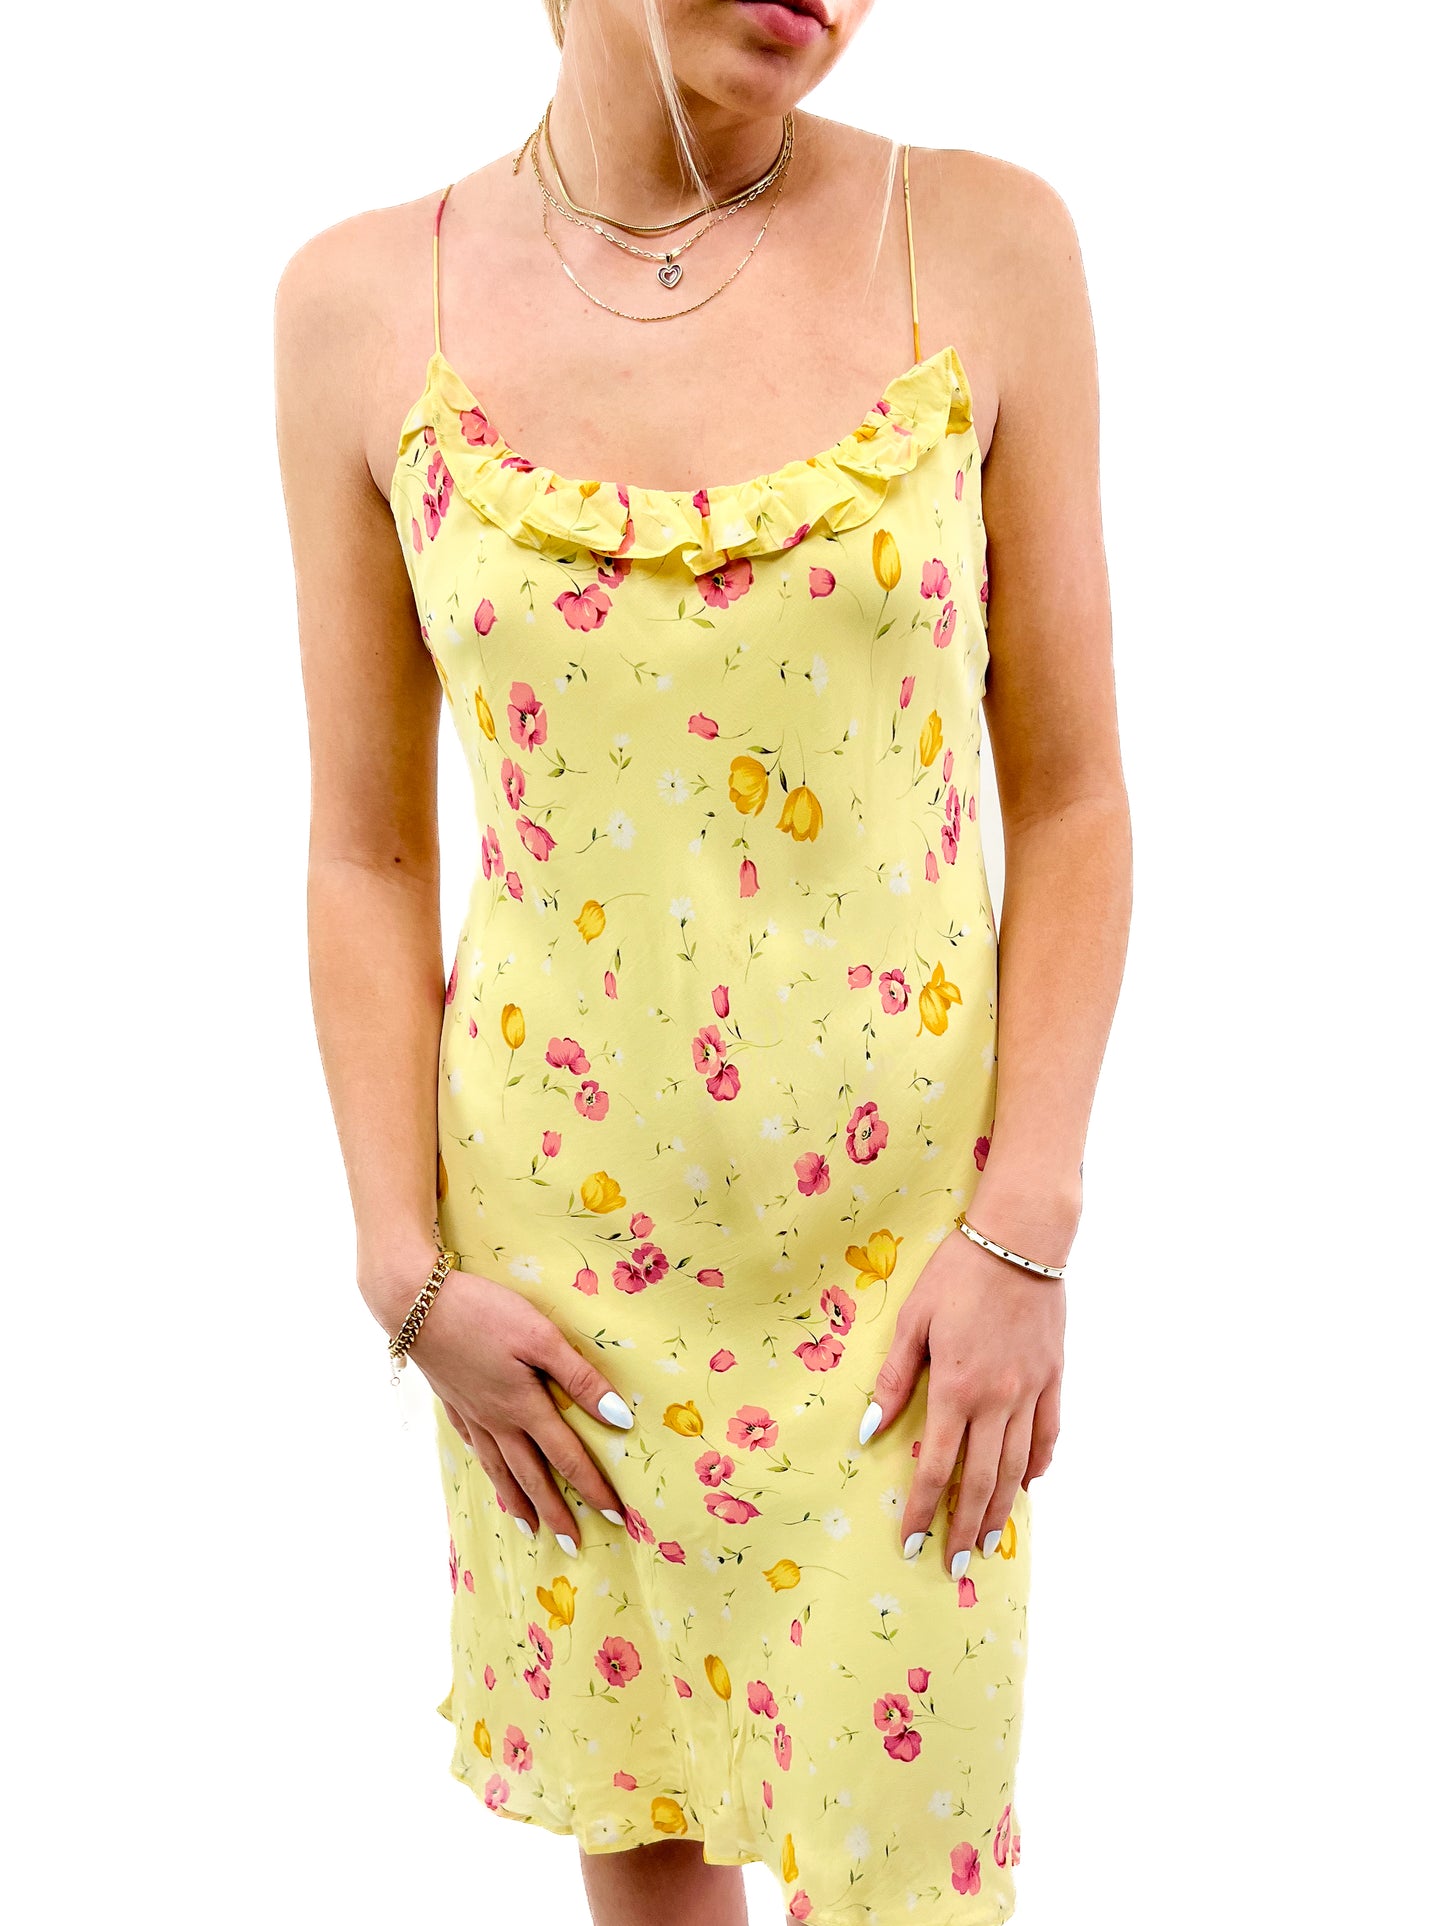 90s Yellow Floral Dress